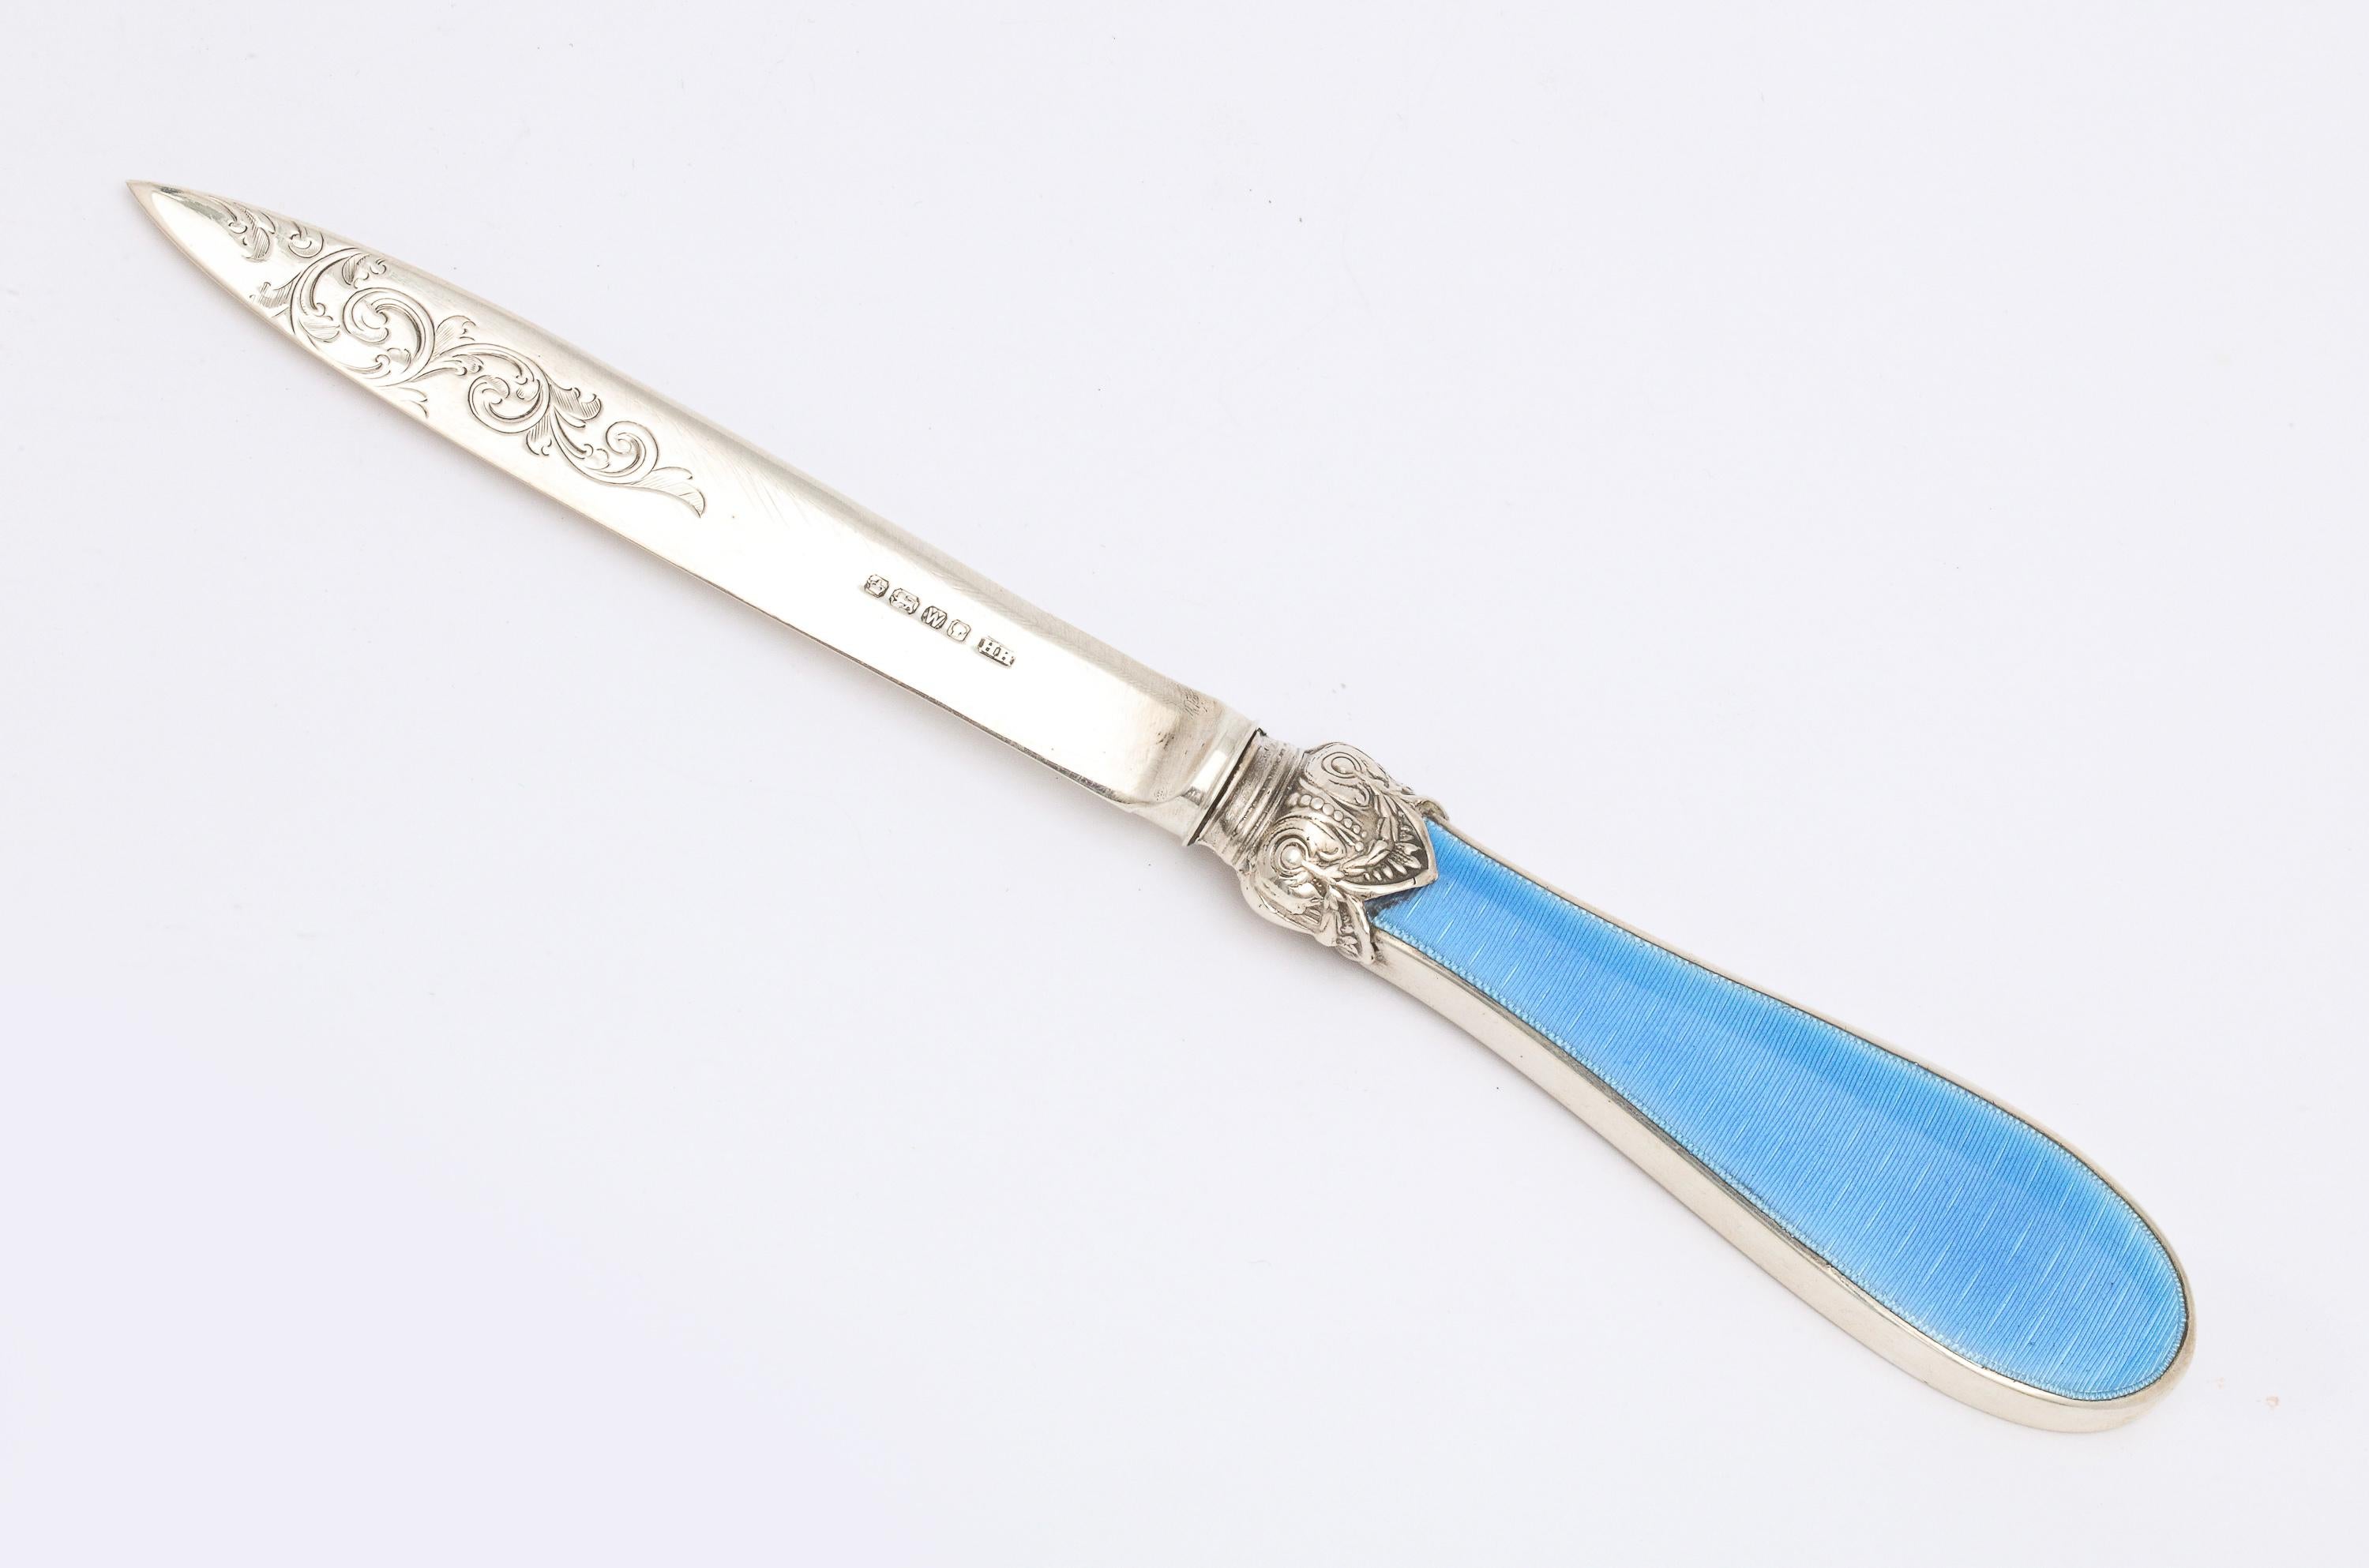 Victorian, sterling silver and blue guilloche enamel - mounted letter / opener paper knife, Sheffield, England, year-hallmarked for 1889, Henry Harrison - maker. Measures over 8 3/4 inches long x almost 1 1/4 inches wide at widest point x almost 1/2